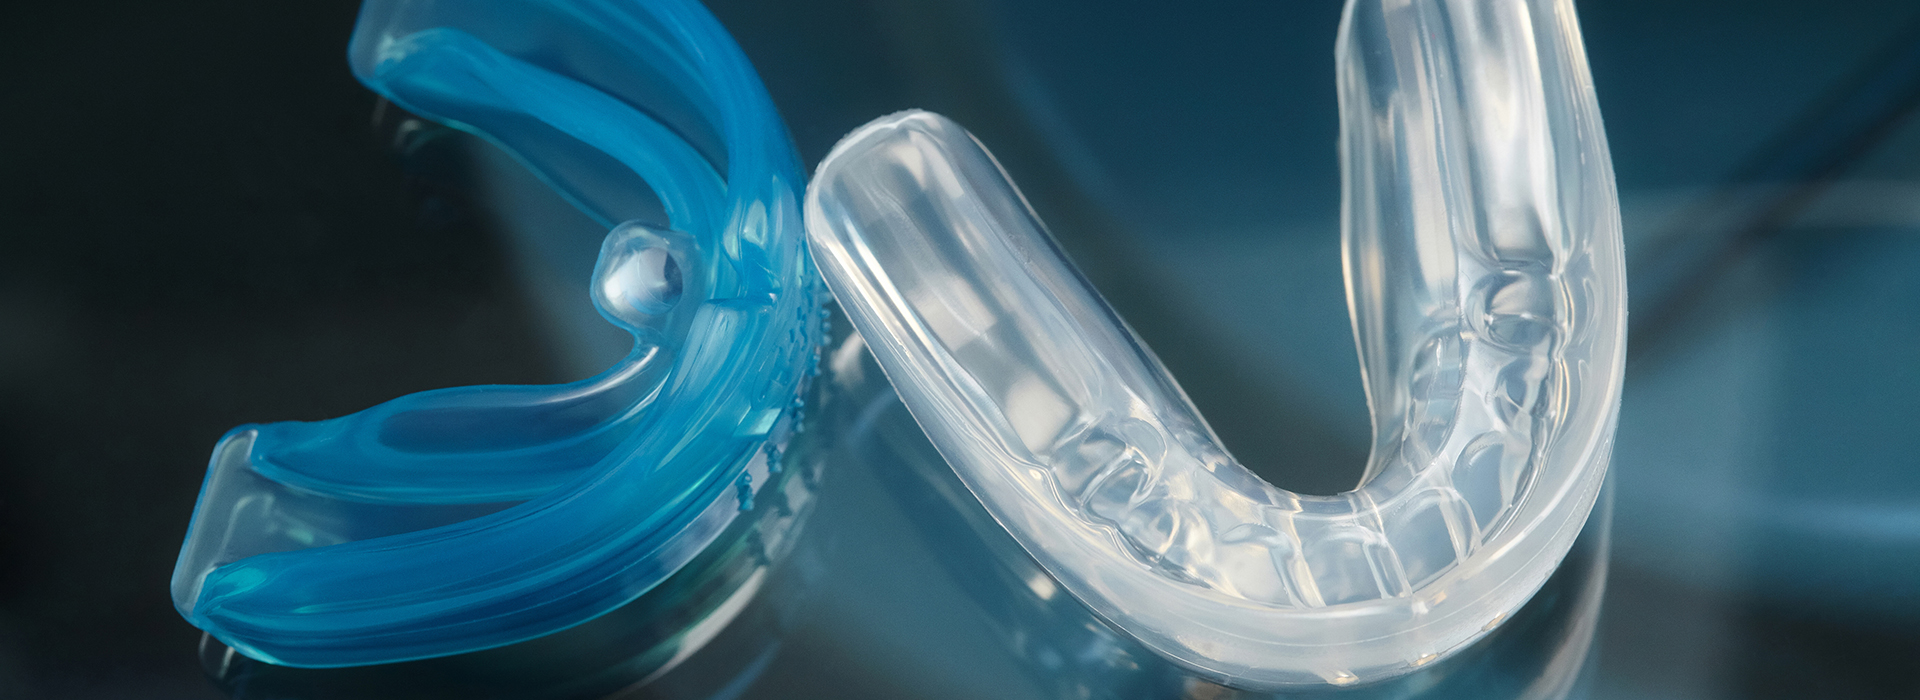 The image shows a close-up of a blue and clear plastic object with a curved shape, resembling a pair of glasses, against a blurred background.